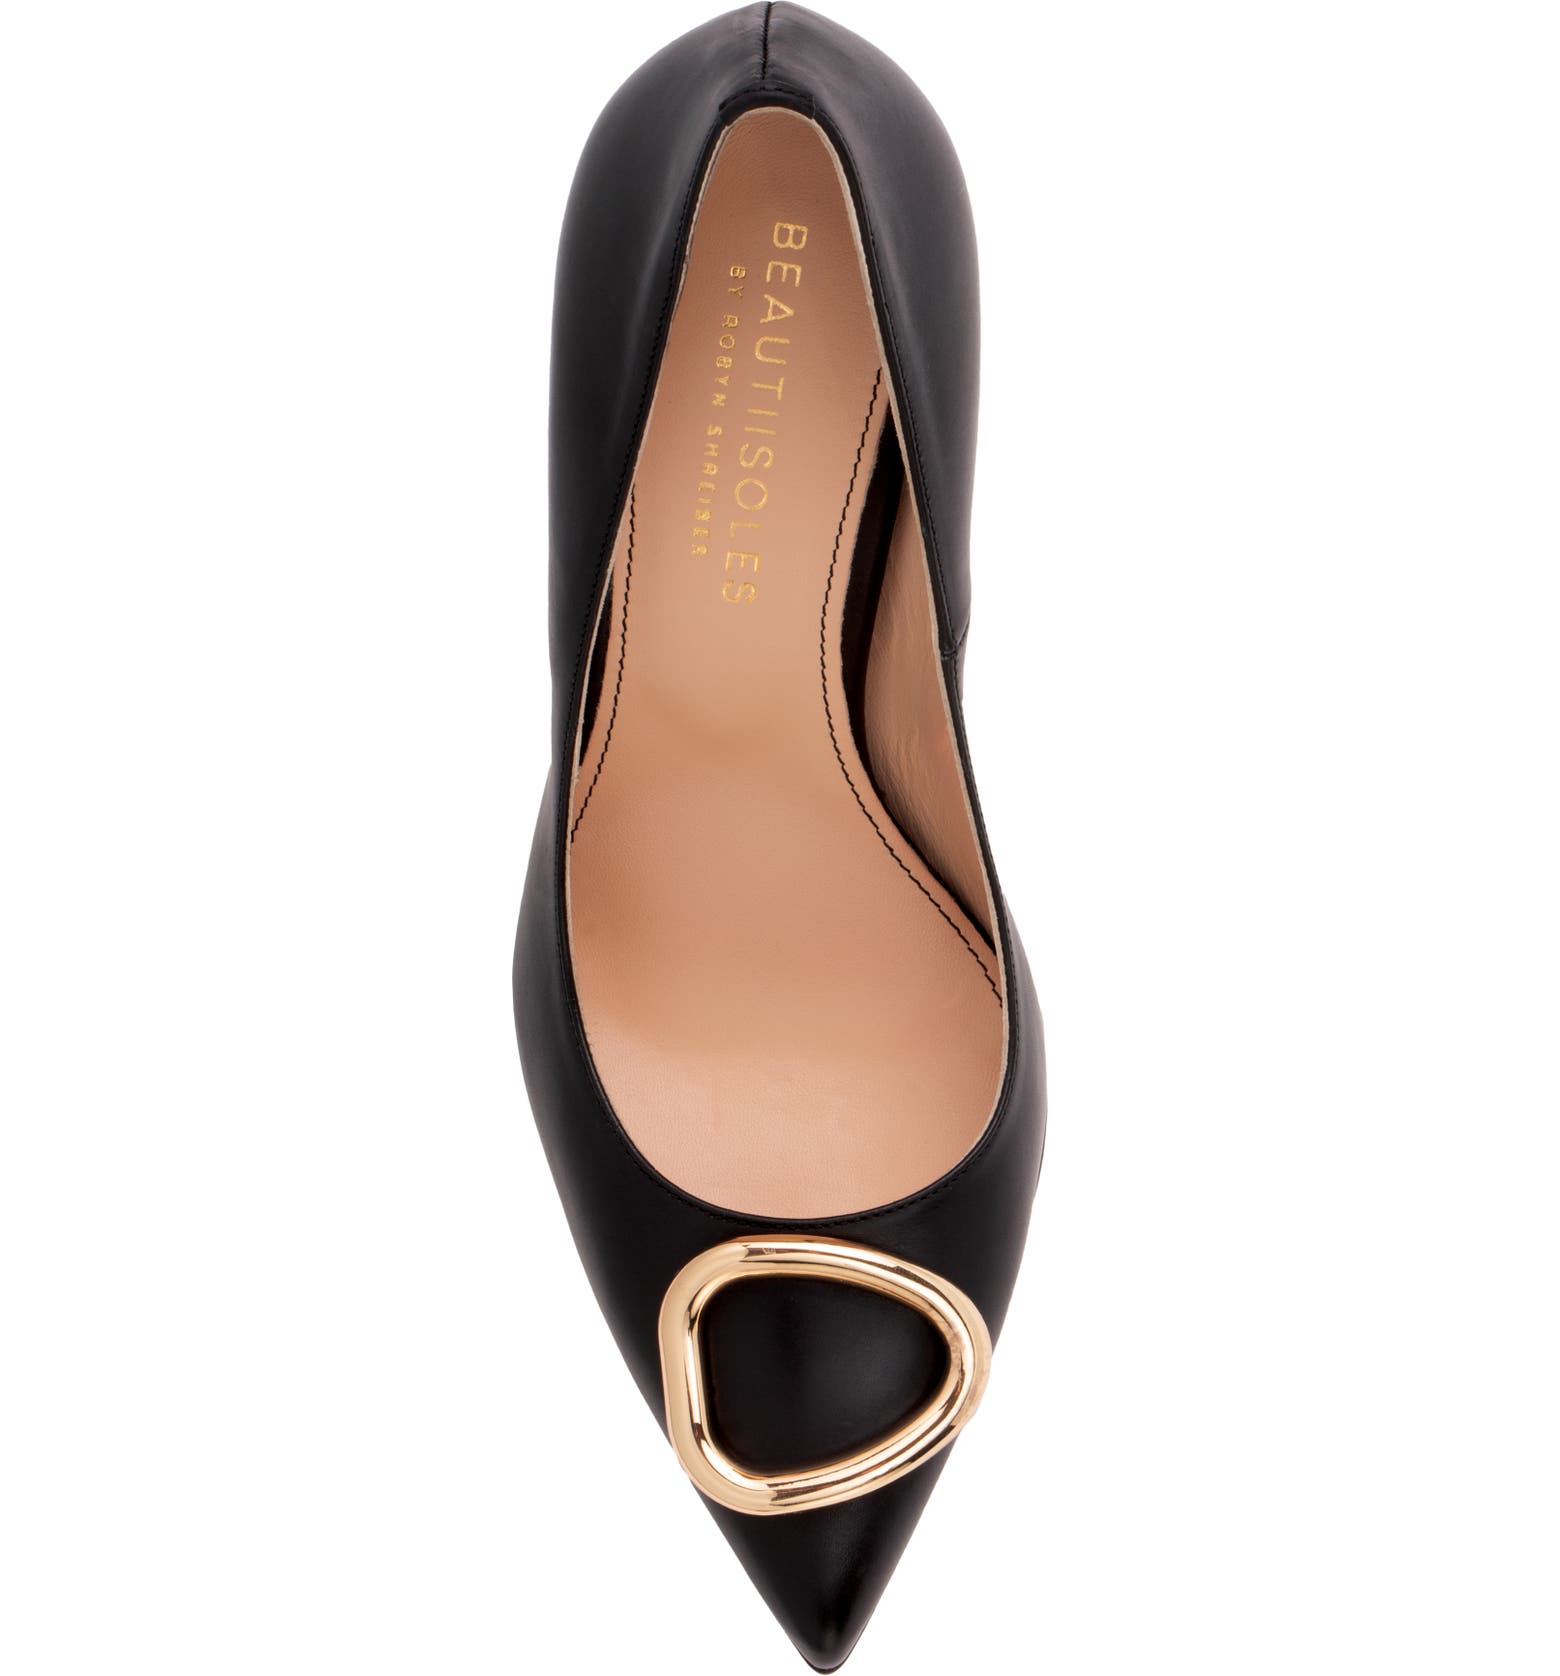 BEAUTIISOLES Lory Pointed Toe Pump | Nordstrom